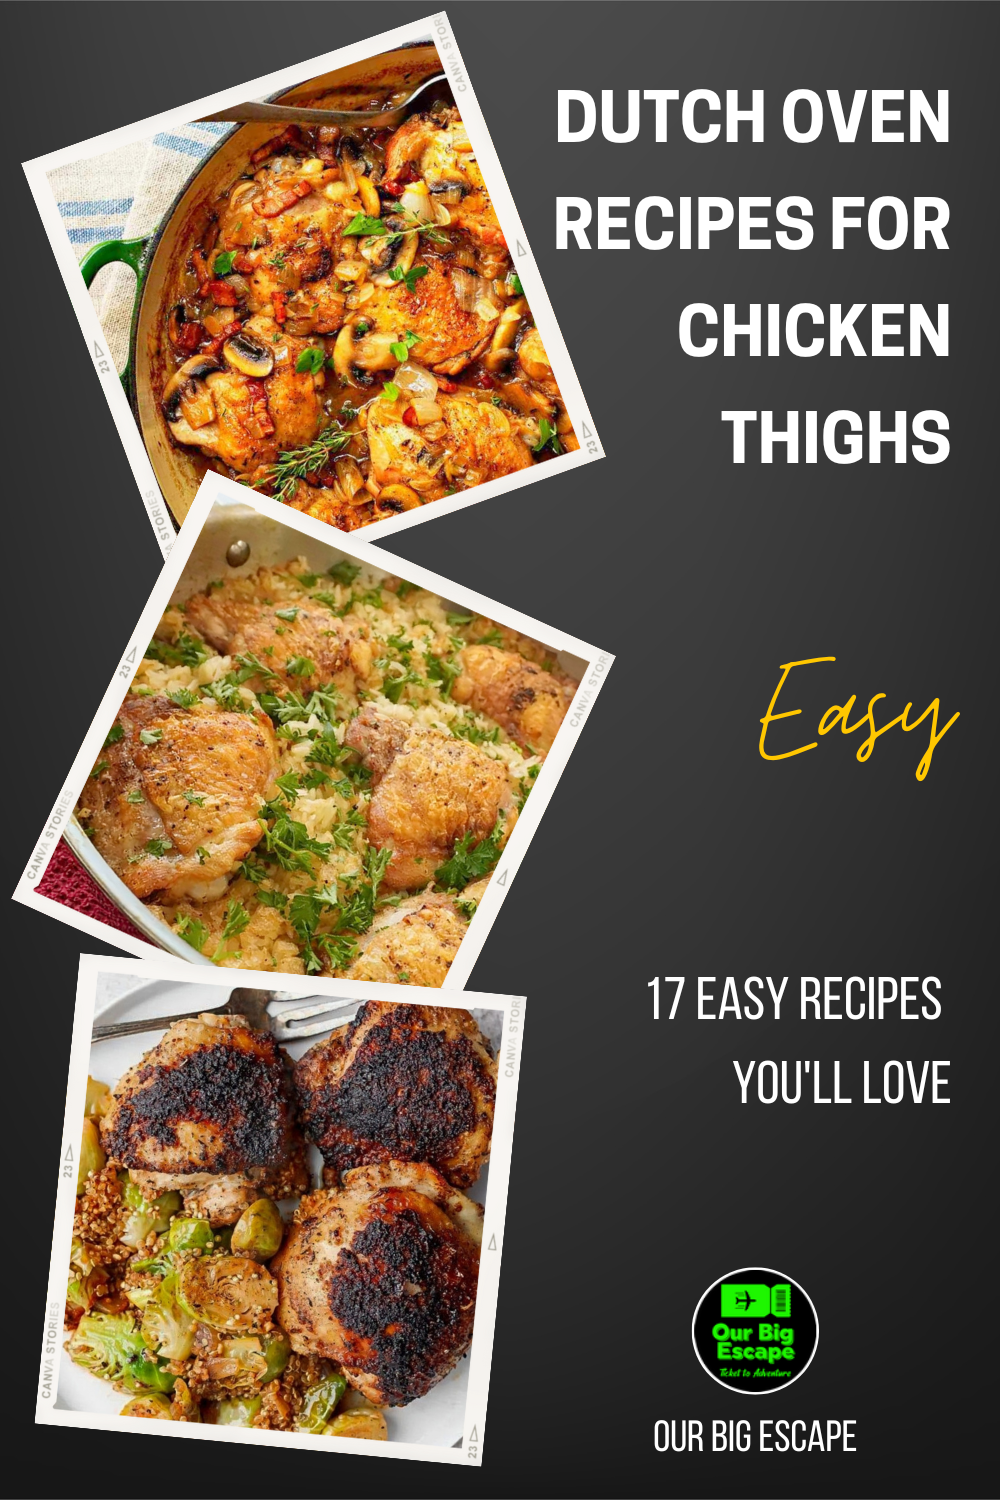 17 Easy Dutch Oven Recipes For Chicken Thighs You'll Love